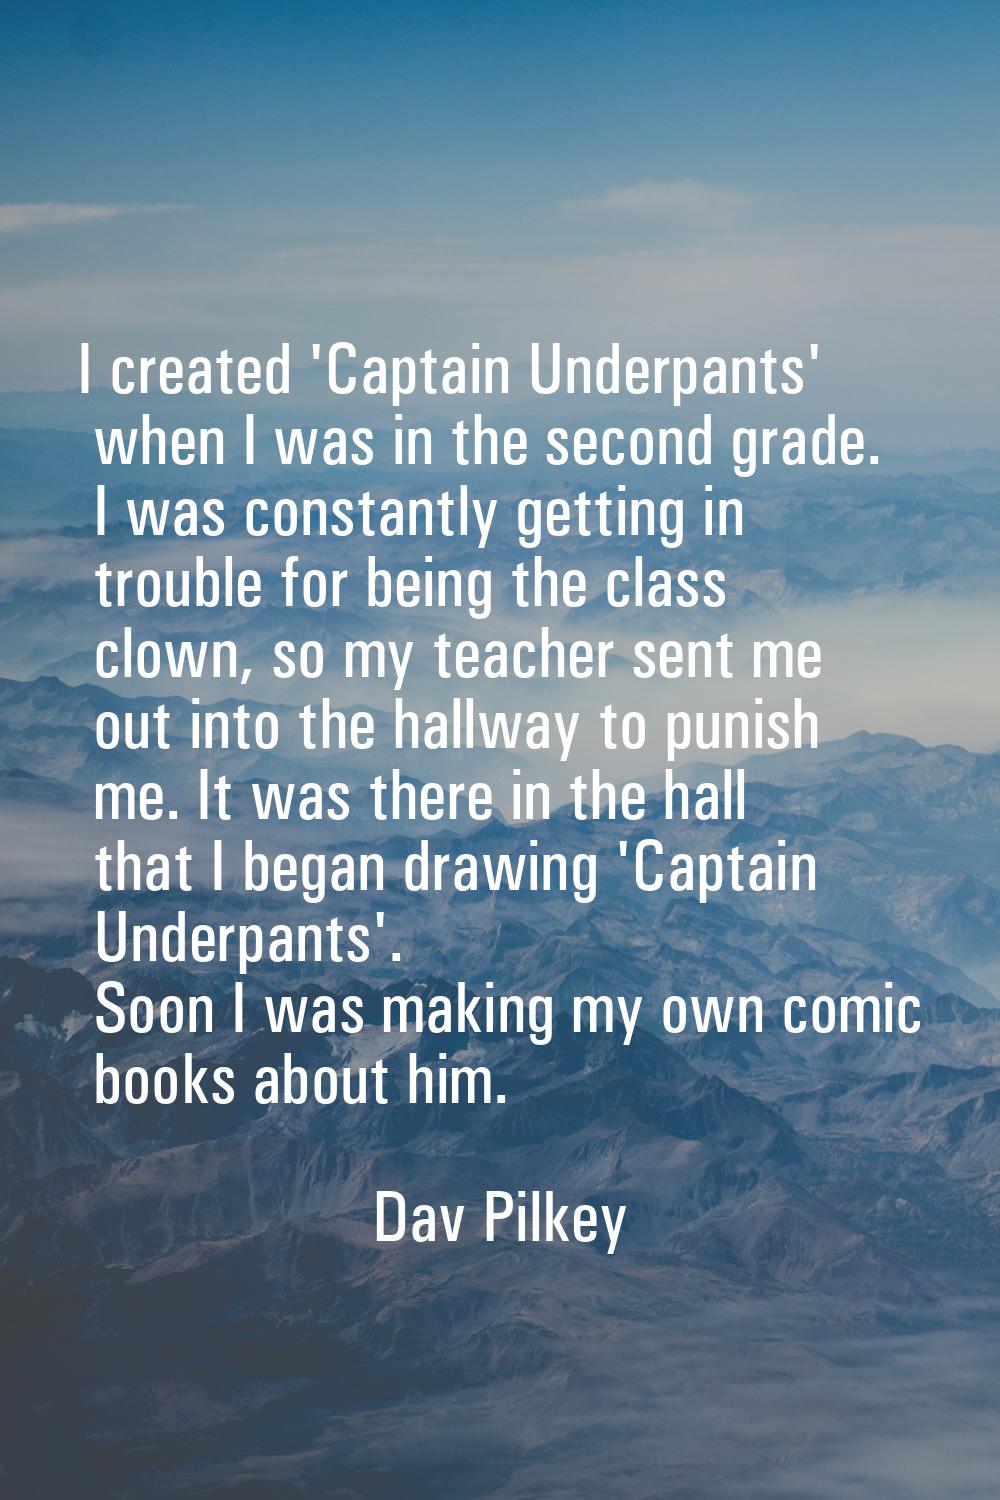 I created 'Captain Underpants' when I was in the second grade. I was constantly getting in trouble 